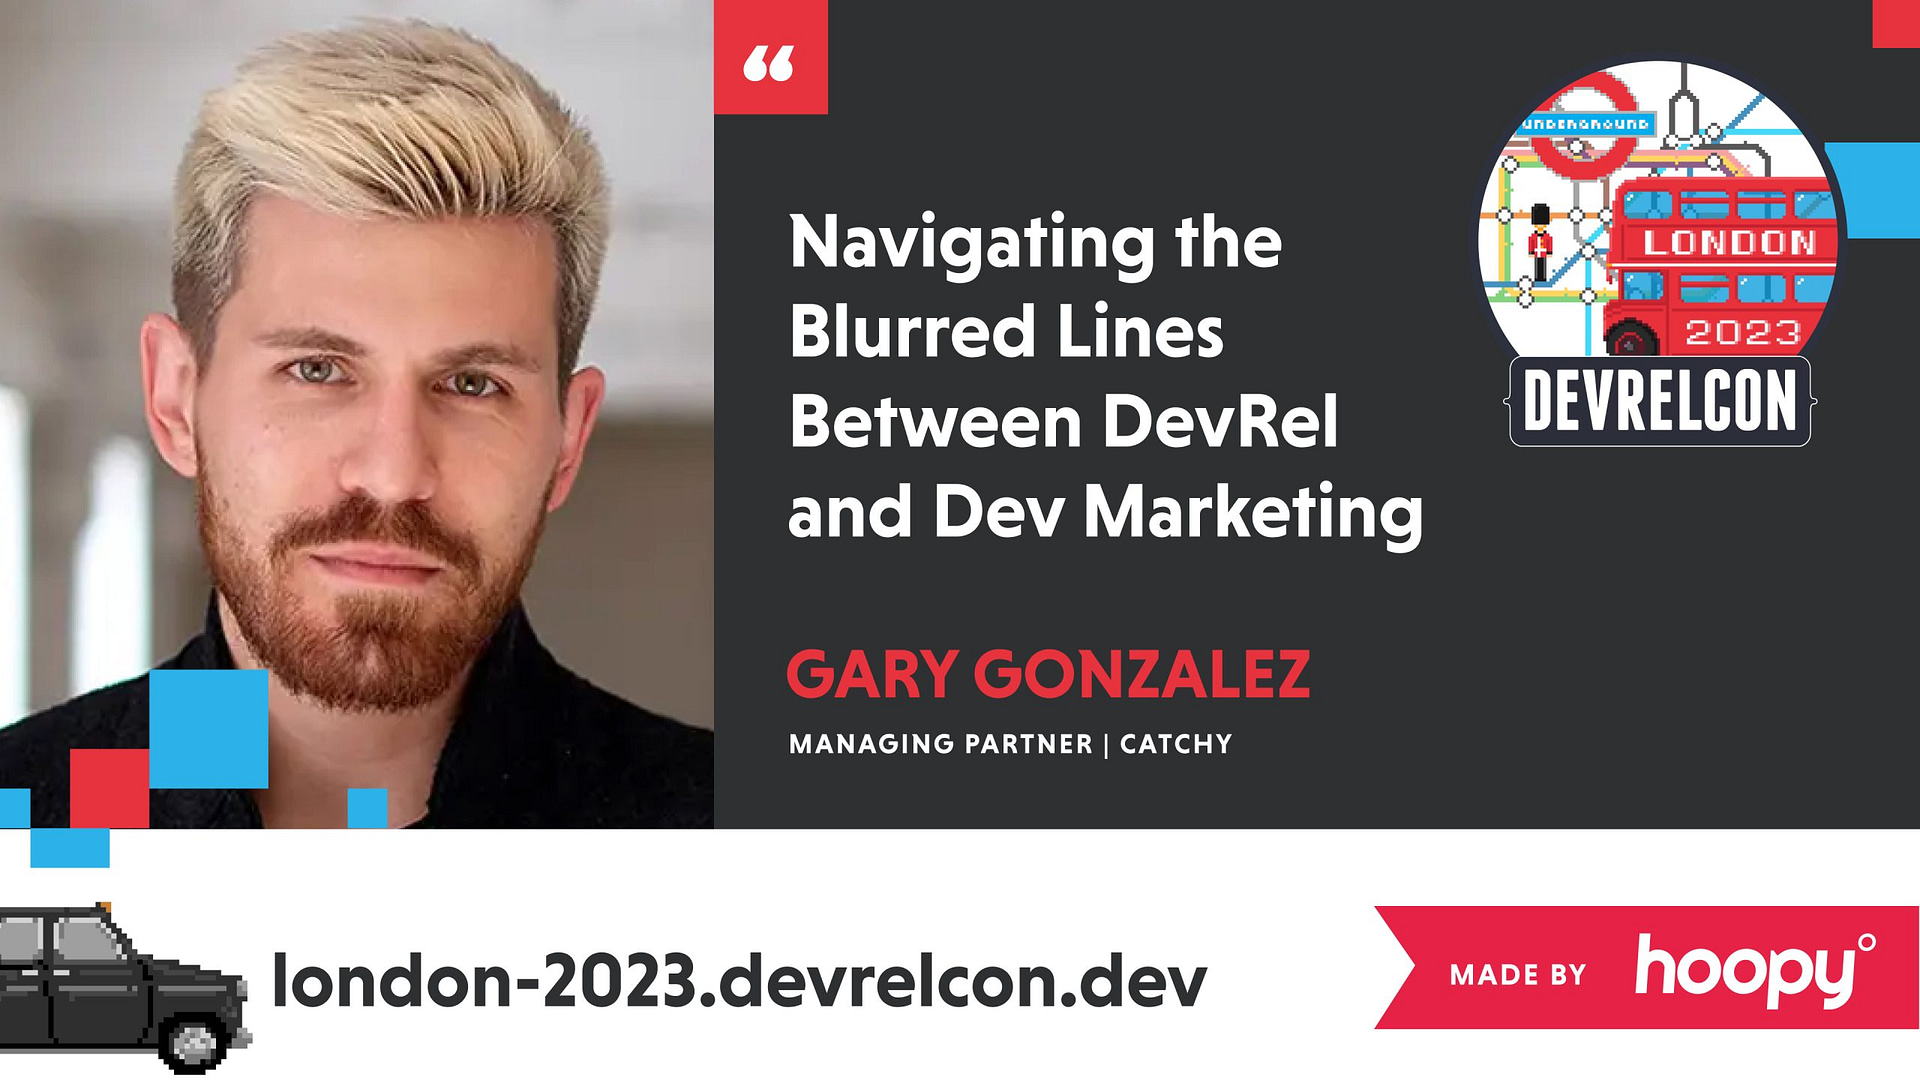 Promotional graphic for a conference talk. The image features a headshot of a man with a beard and styled hair named Gary Gonzalez, labeled as Managing Partner at Catchy. The talk title is 'Navigating the Blurred Lines Between DevRel and Dev Marketing'. The background includes graphics related to London, like the London Underground sign, a red double-decker bus, and a black taxi, indicating the location of the event - DEVRELCON London 2023. The website 'london-2023.devrelcon.dev' is listed at the bottom, along with the logo of Hoopy, the event organizer.